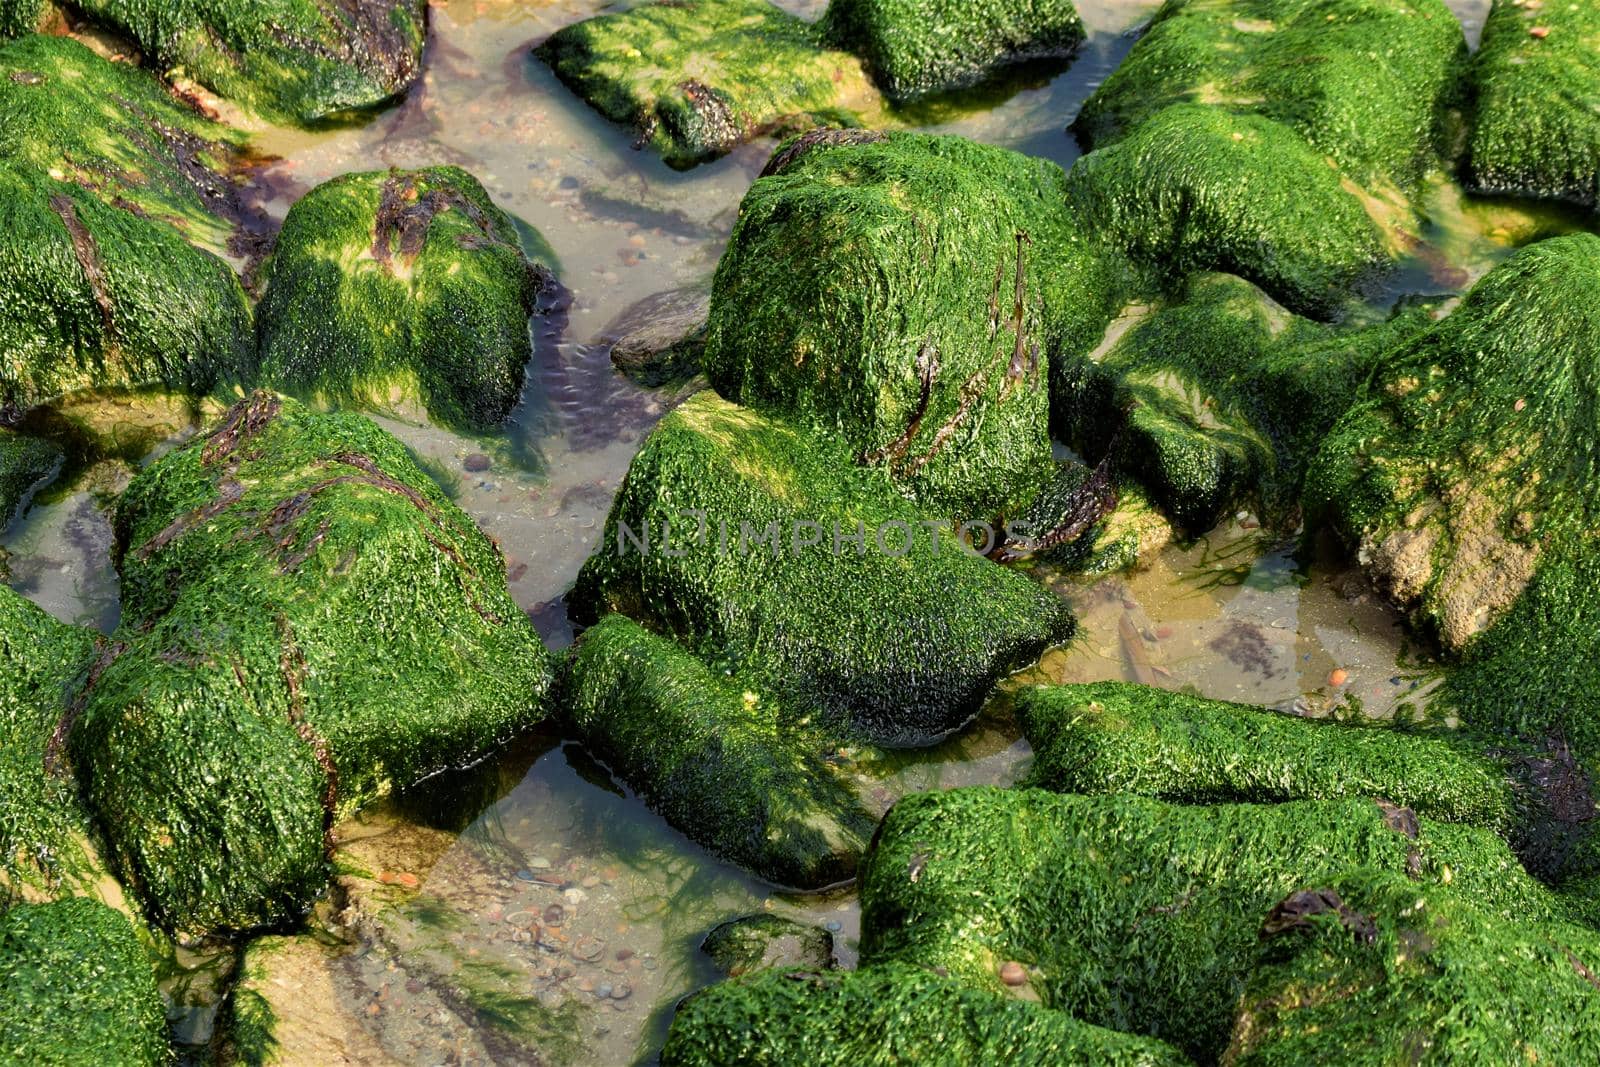 Stones overgrown with algae in the shallow water on the beach by Luise123